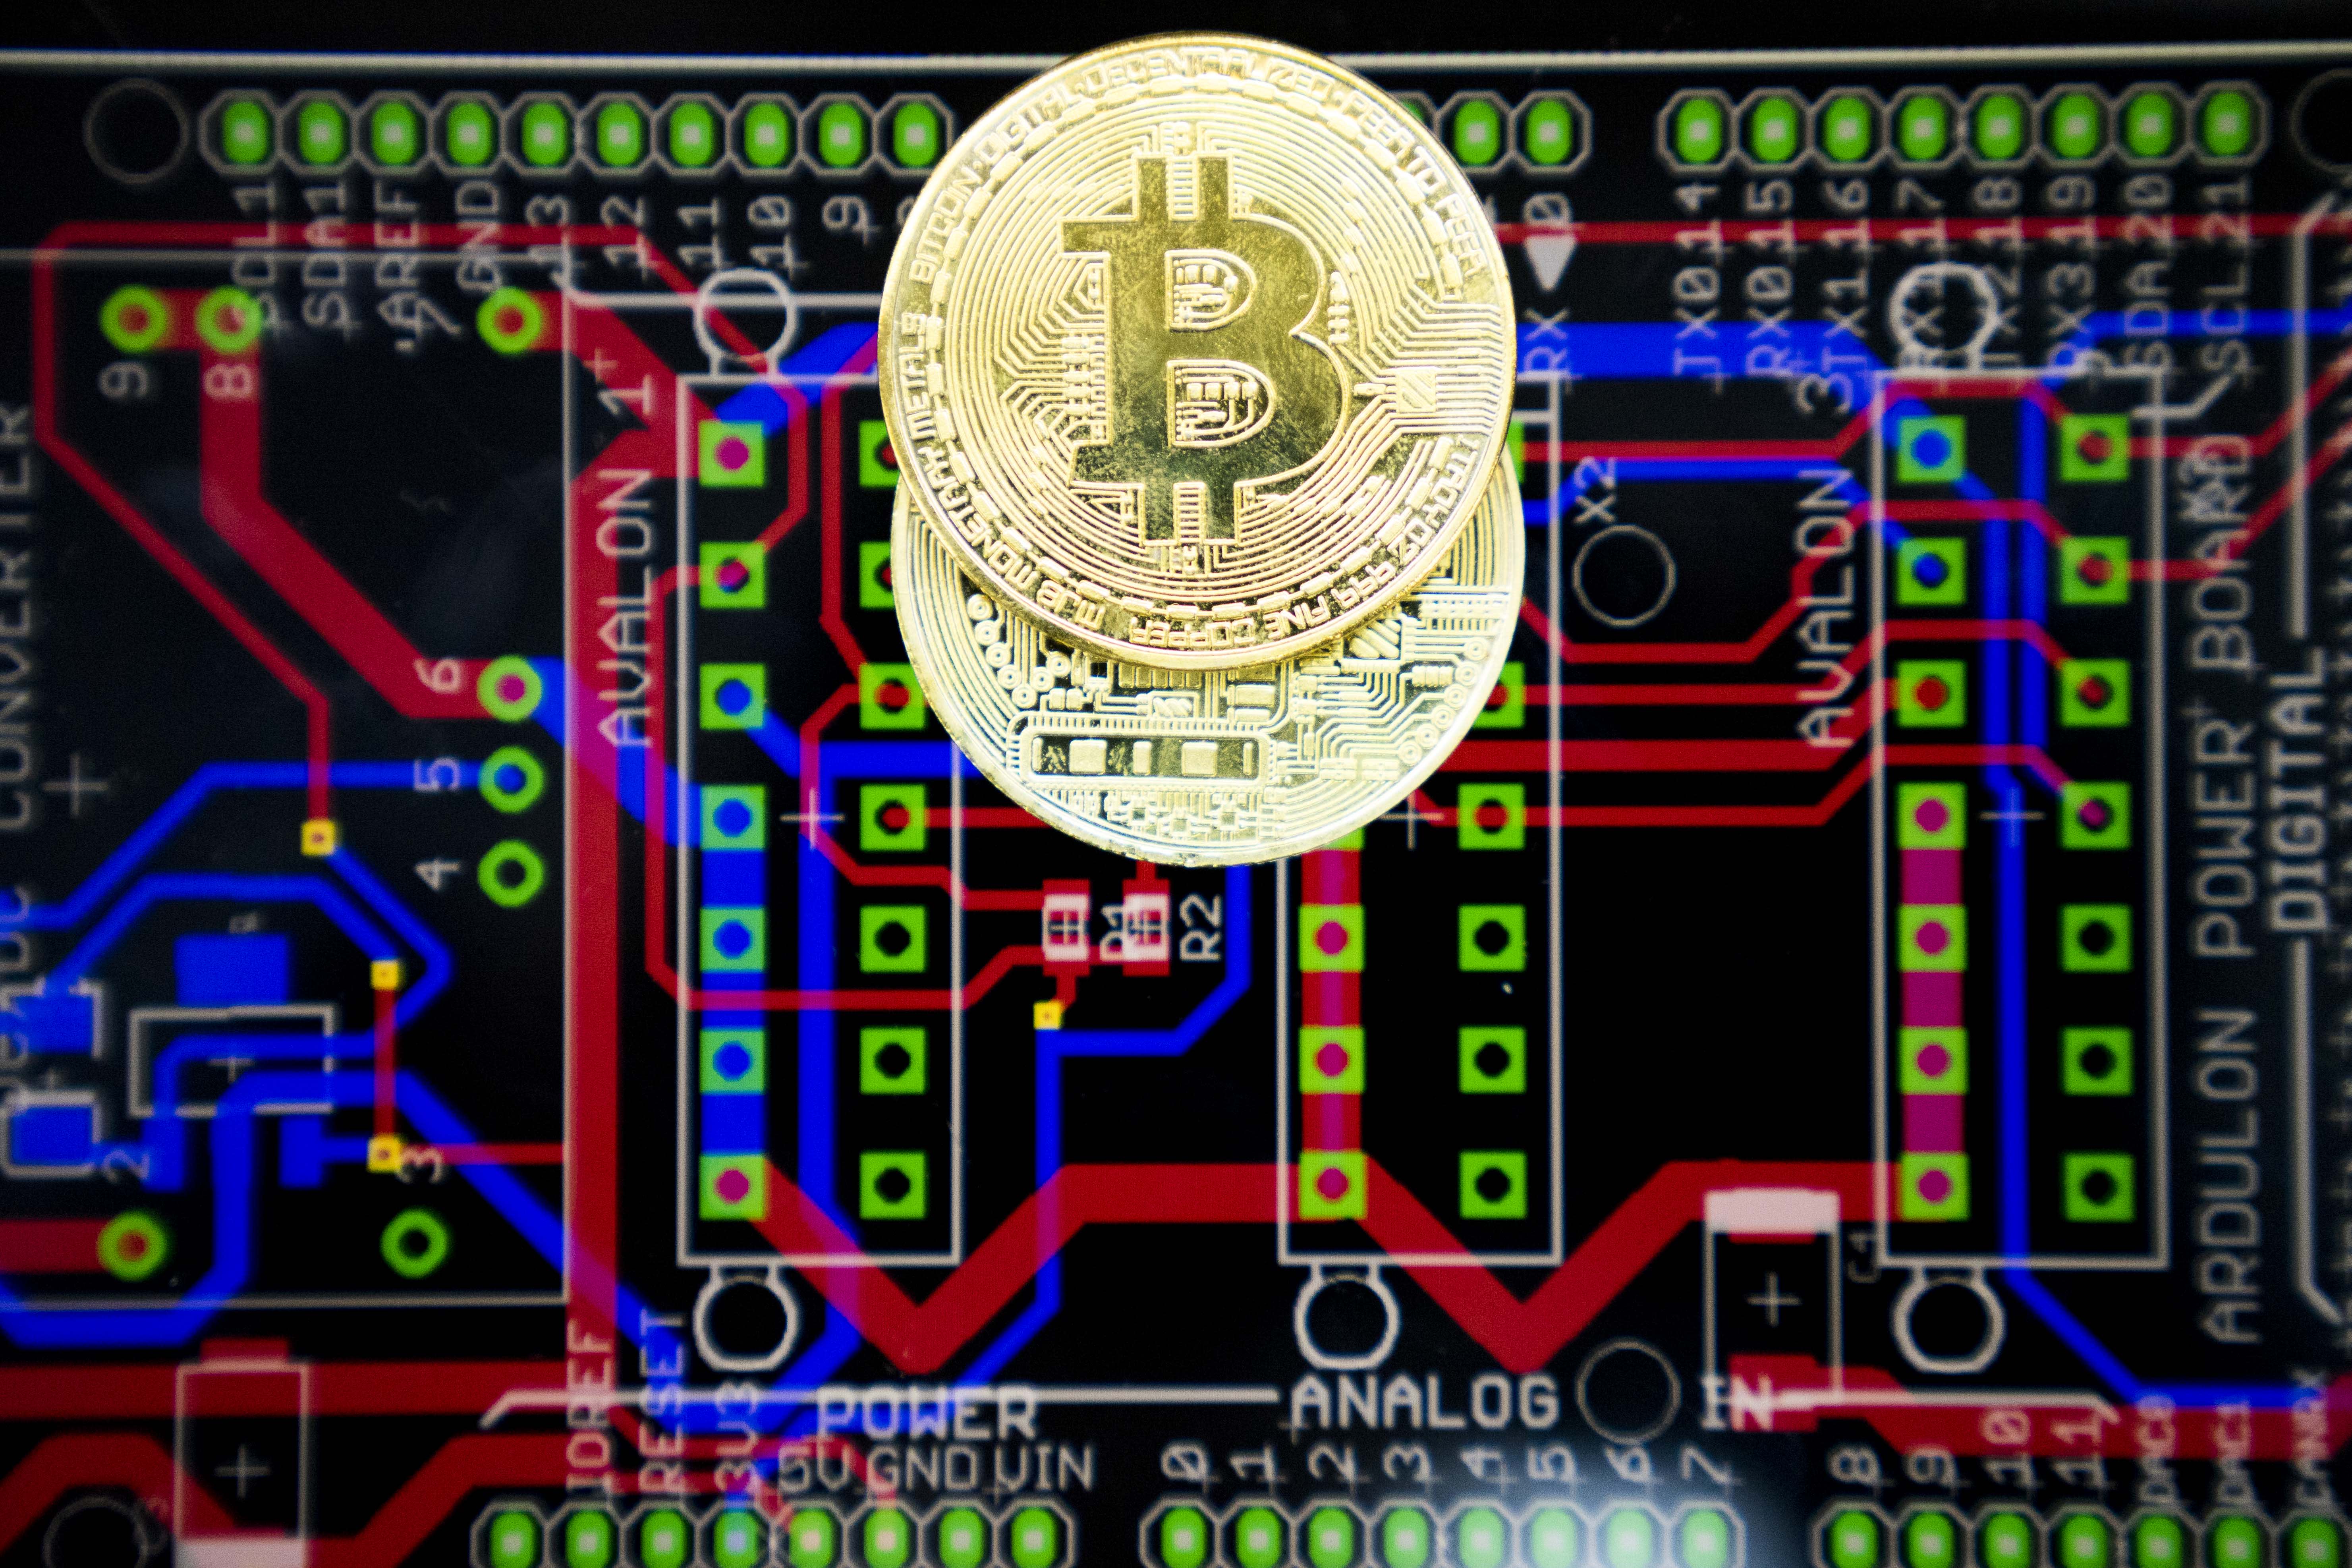 China Bitcoin Mining Hub To Shut Down Cryptocurrency Projects